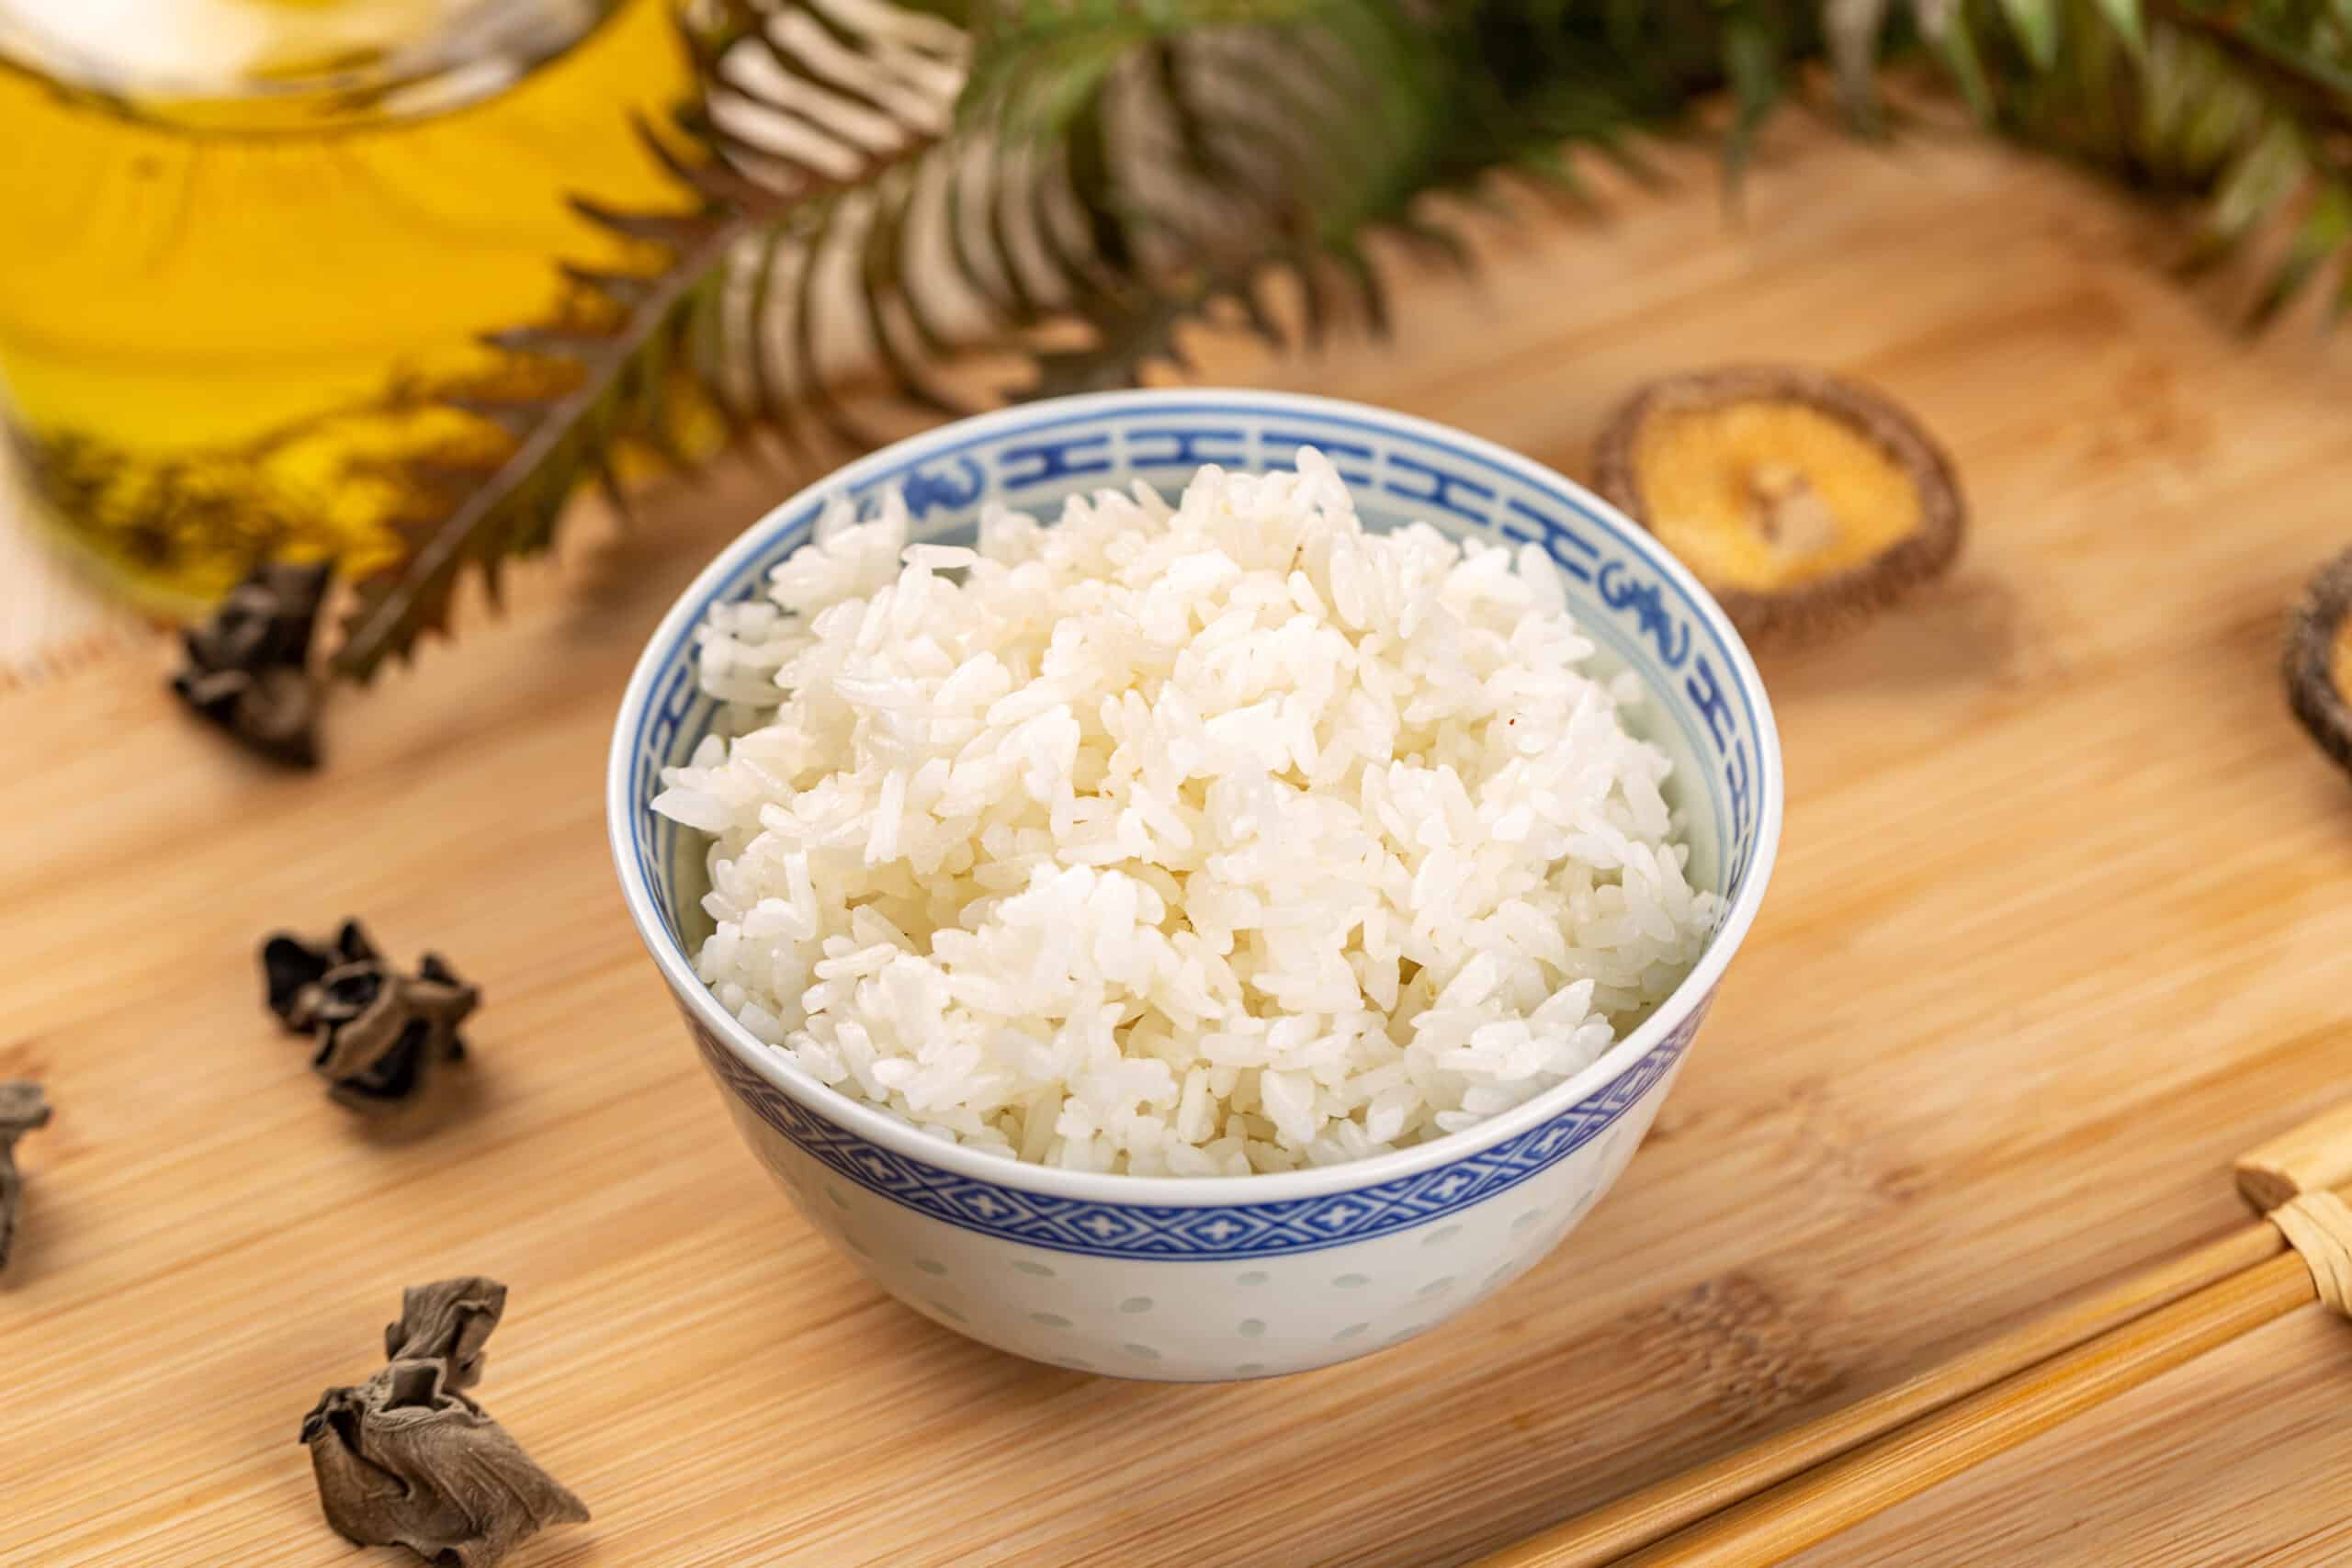 How Do You Make Fluffy Rice In A Rice Cooker?